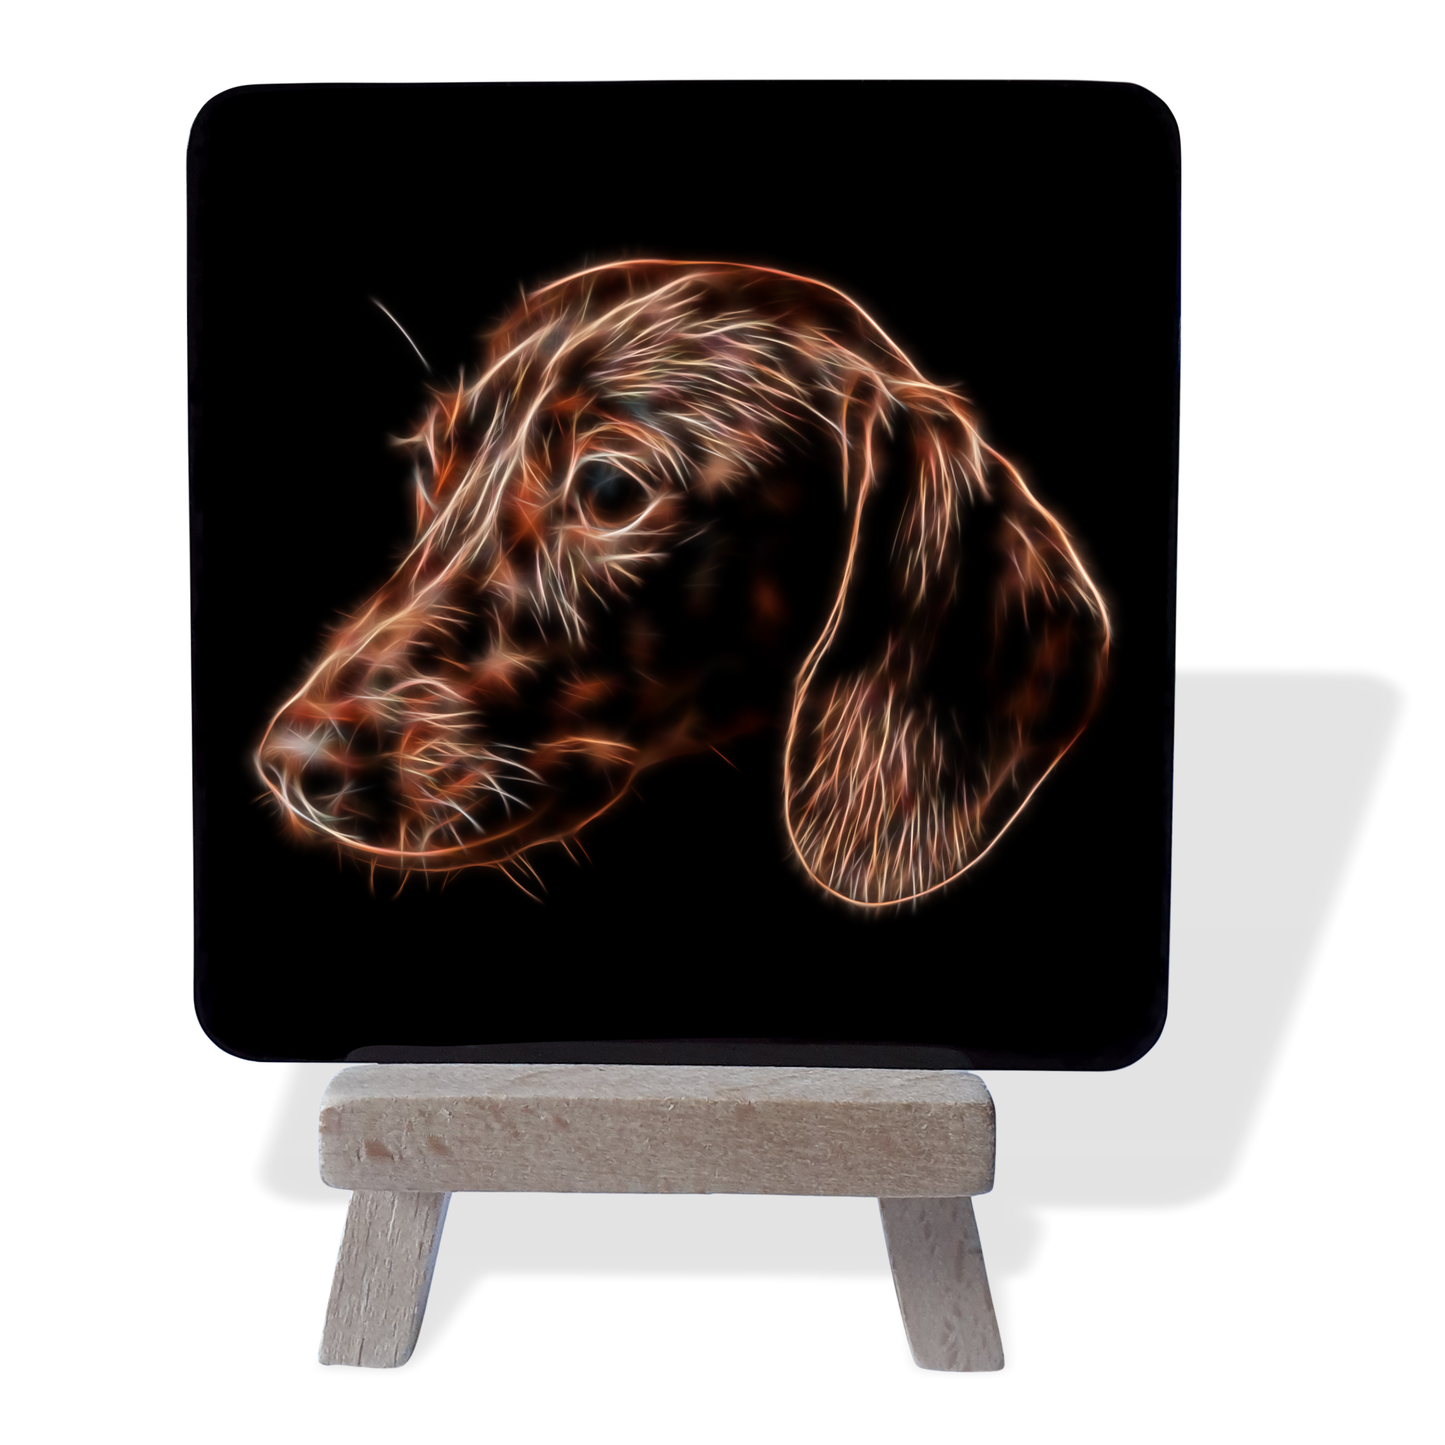 Chocolate Dachshund #1 Metal Plaque and Mini Easel with Fractal Art Design